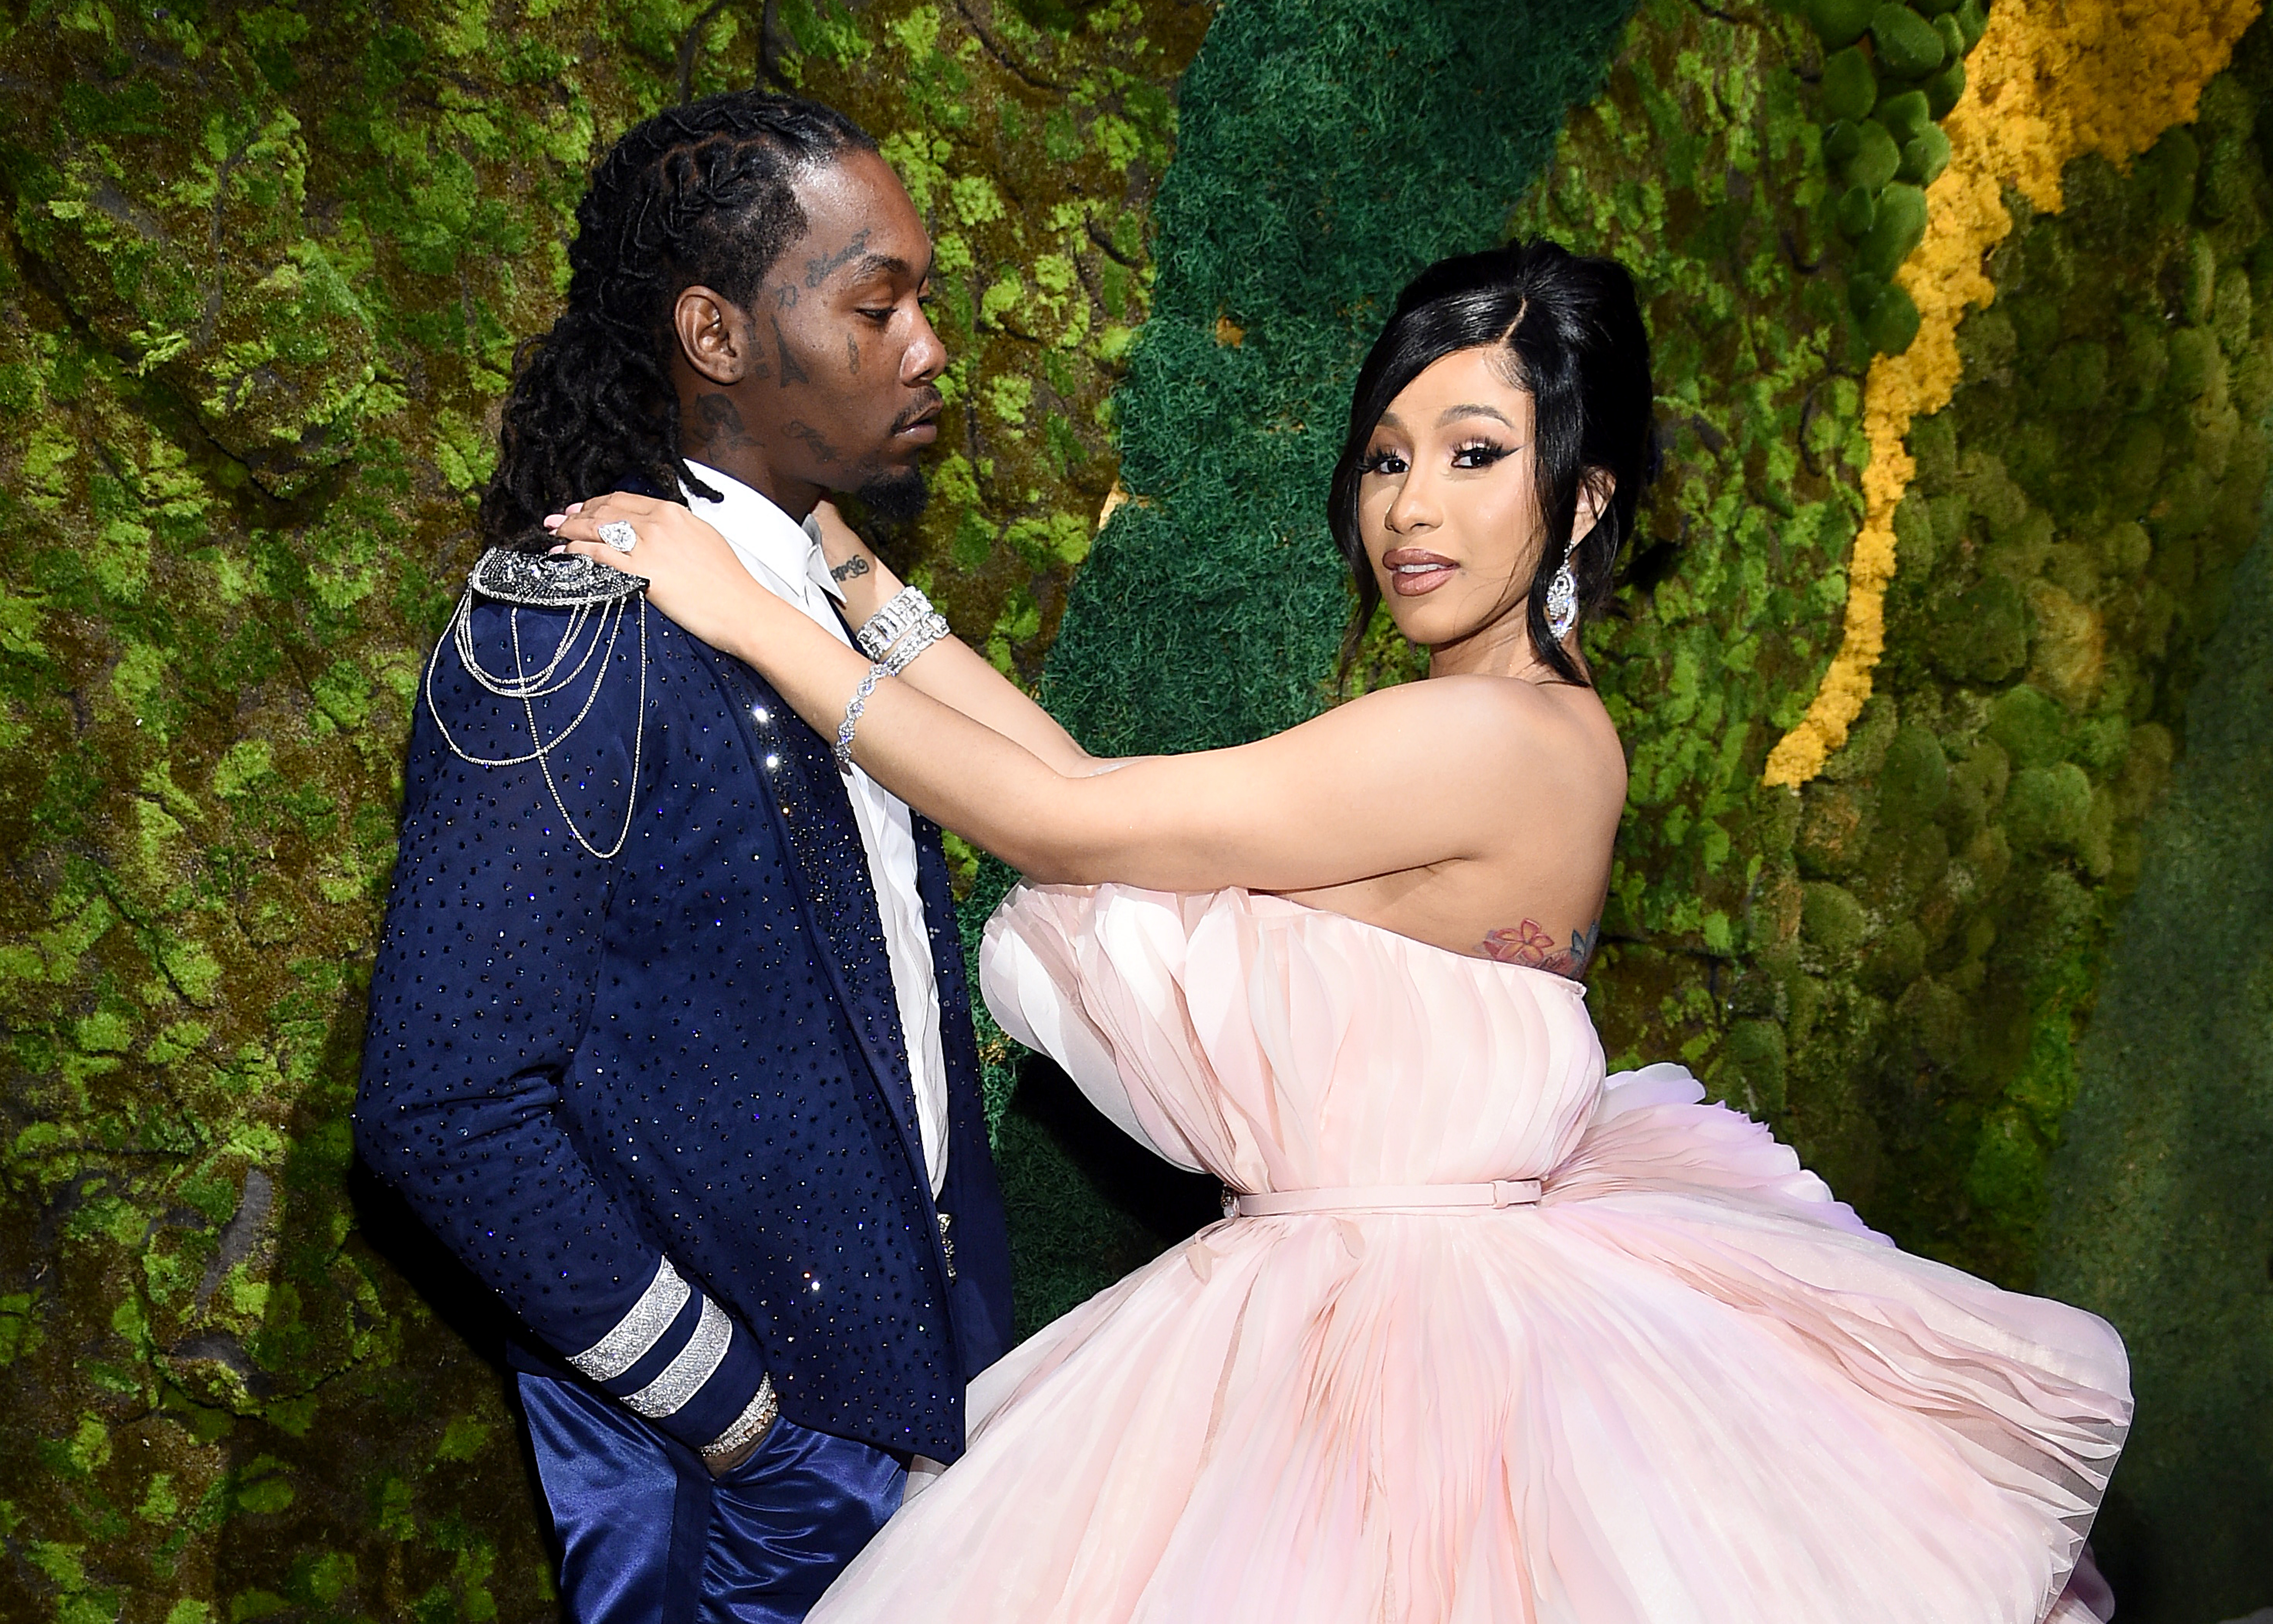 Offset Gifts Cardi B With a “Titanic Diamond” Ring For Her Birthday